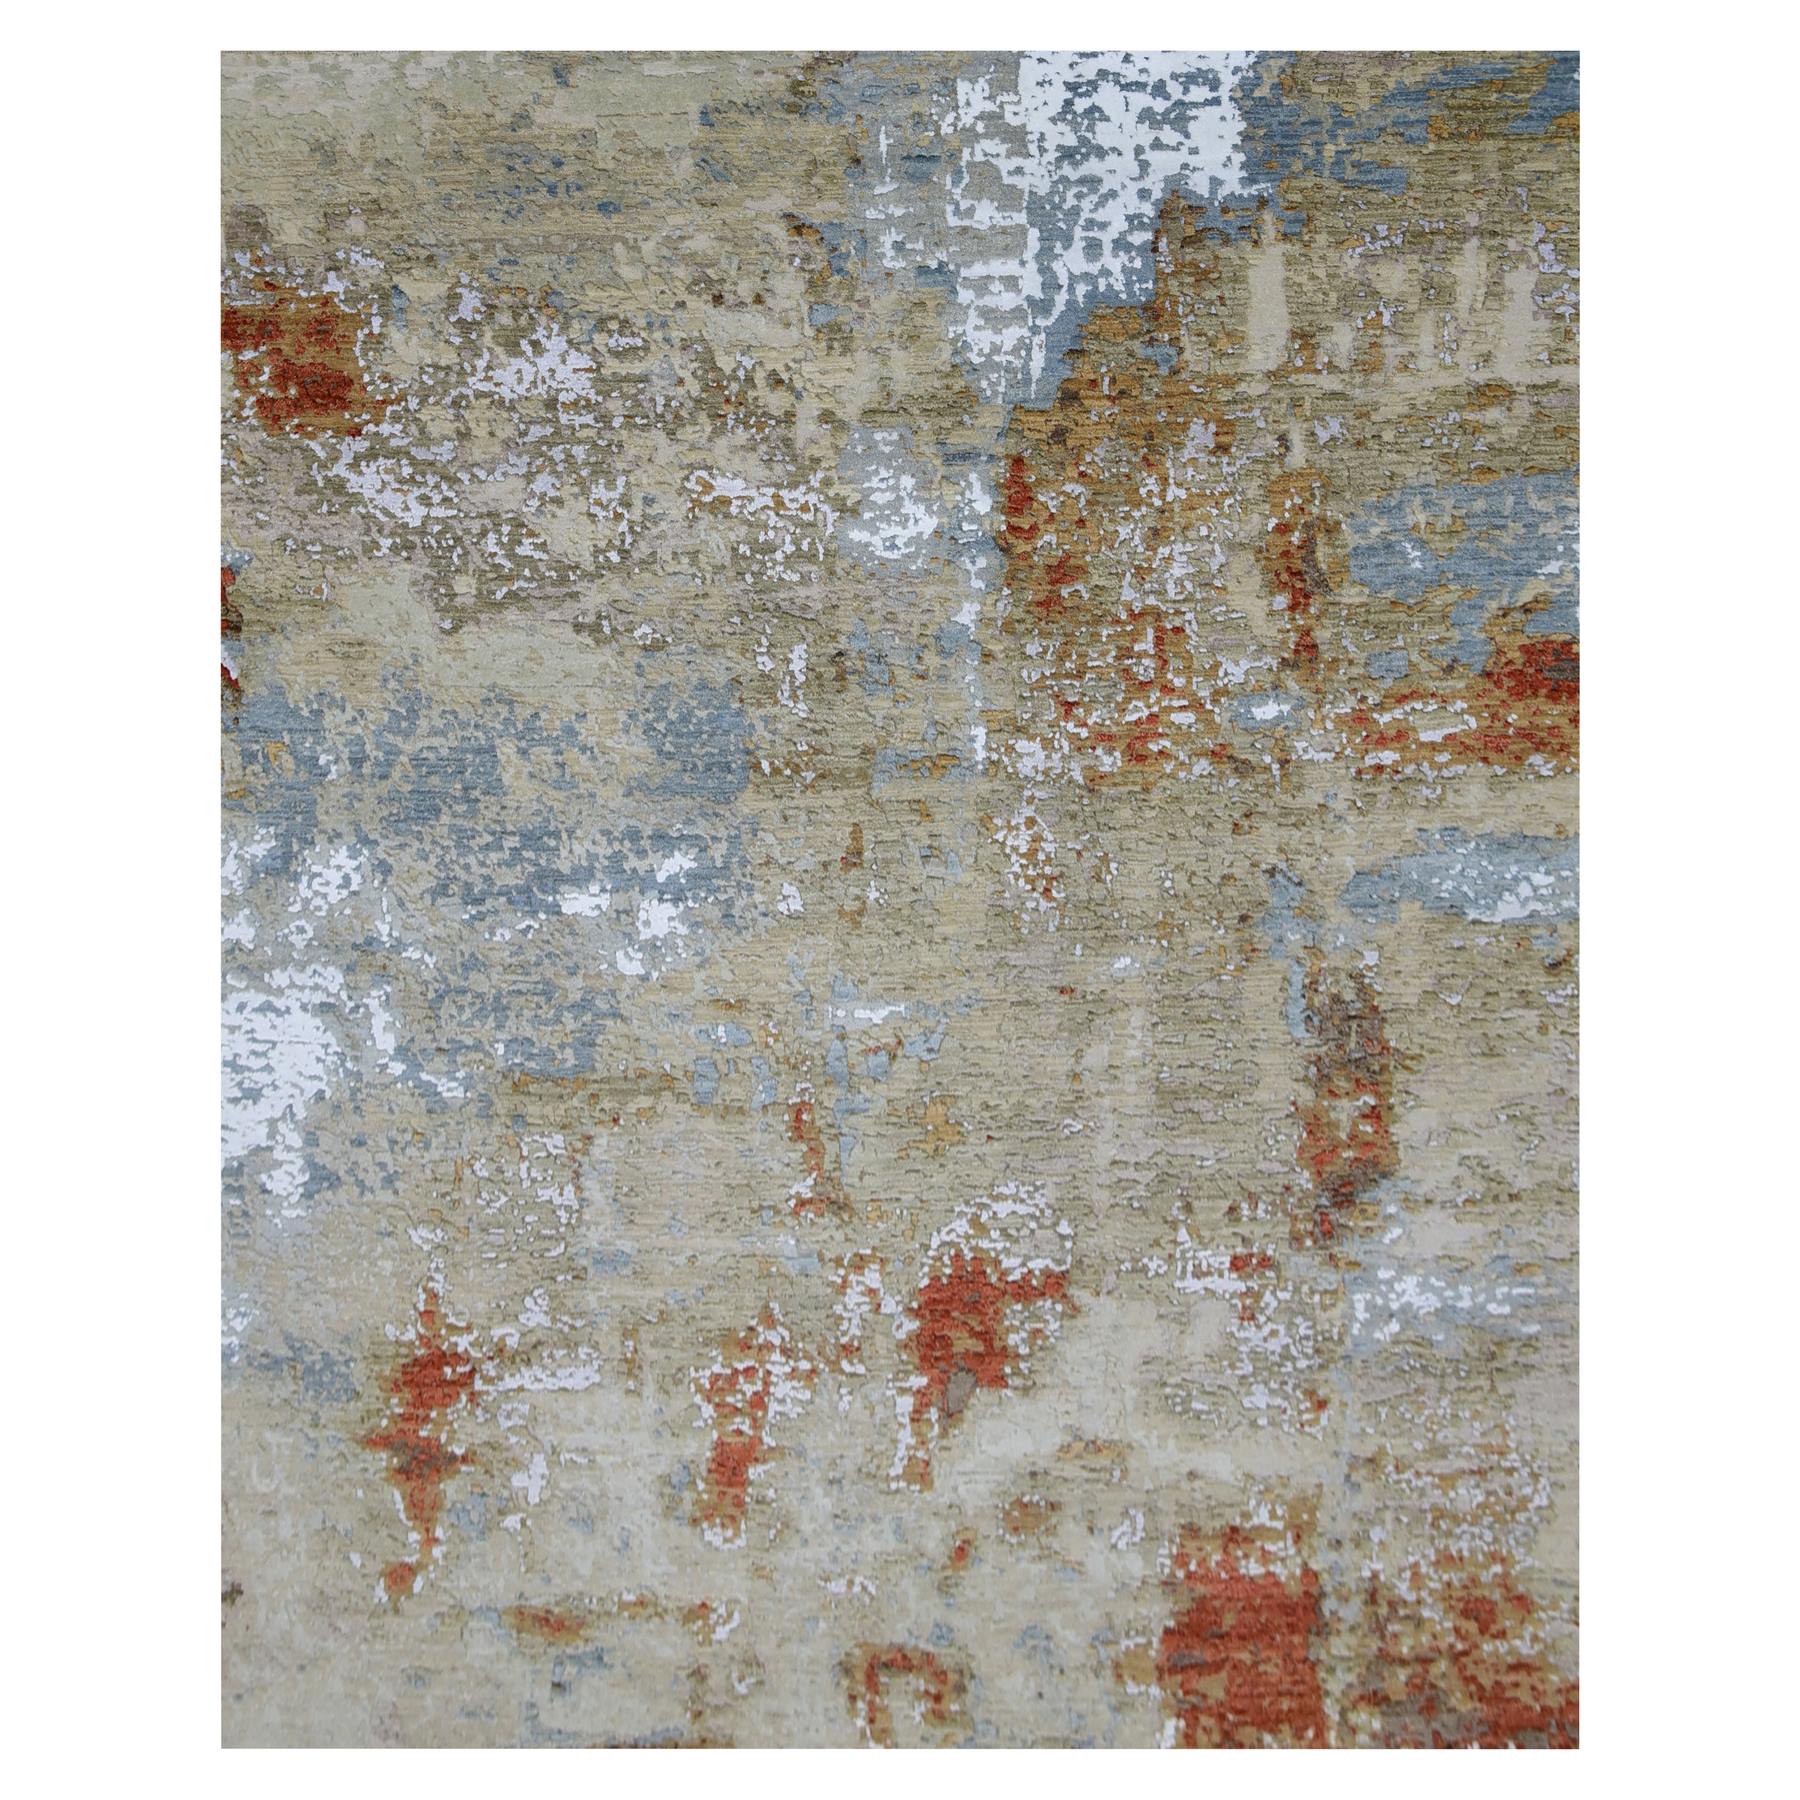 Whisper White With Tucson Red, Densely Woven, Abstract Design, Hand Knotted All Wool, Oriental Rug 